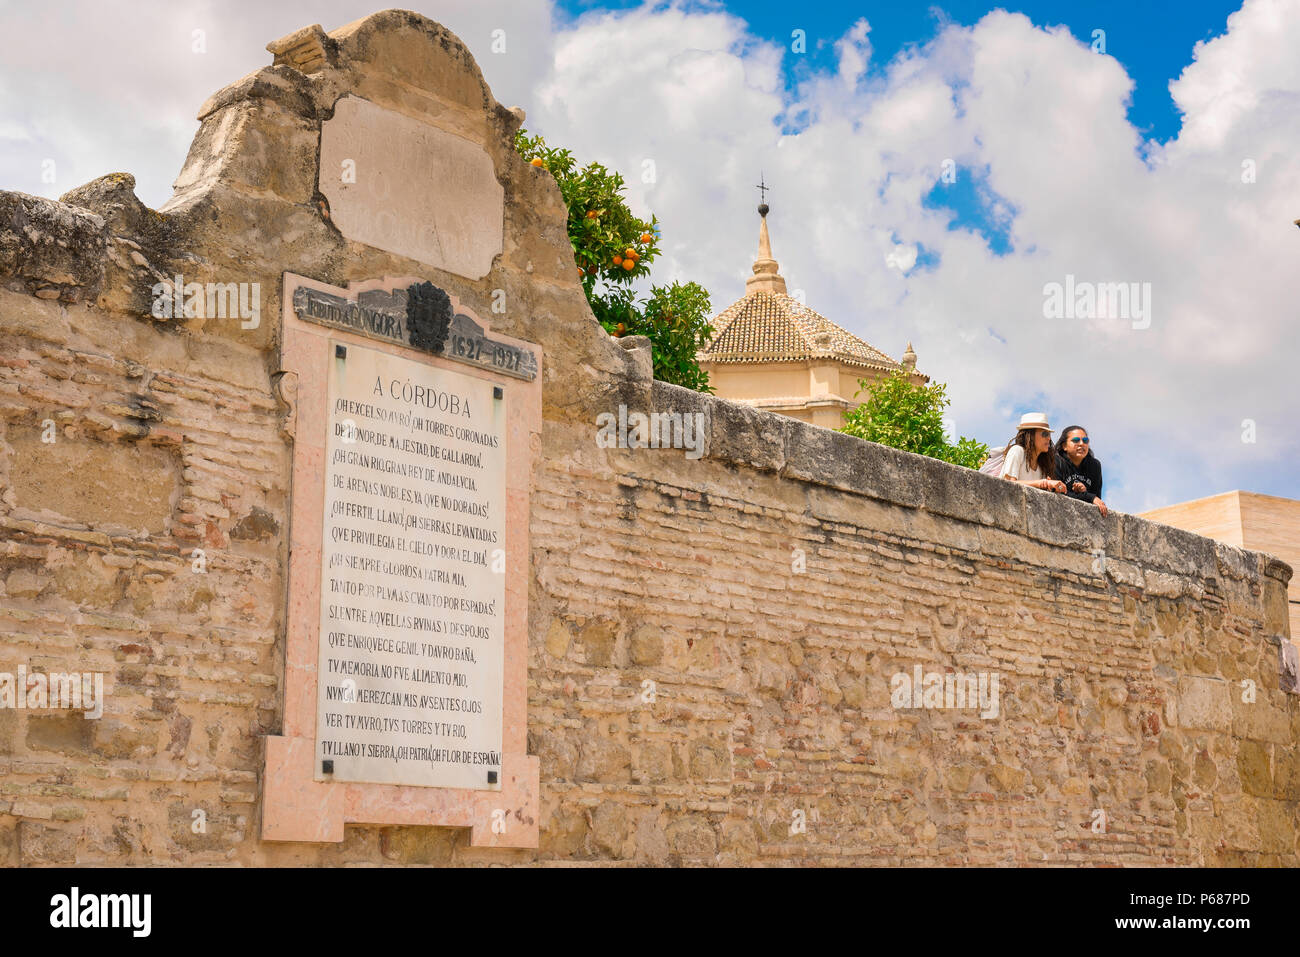 Andalucia Spain travel, view of two young women travelers leaning over the old city wall in Cordoba (Cordova), Andalucia, Spain Stock Photo